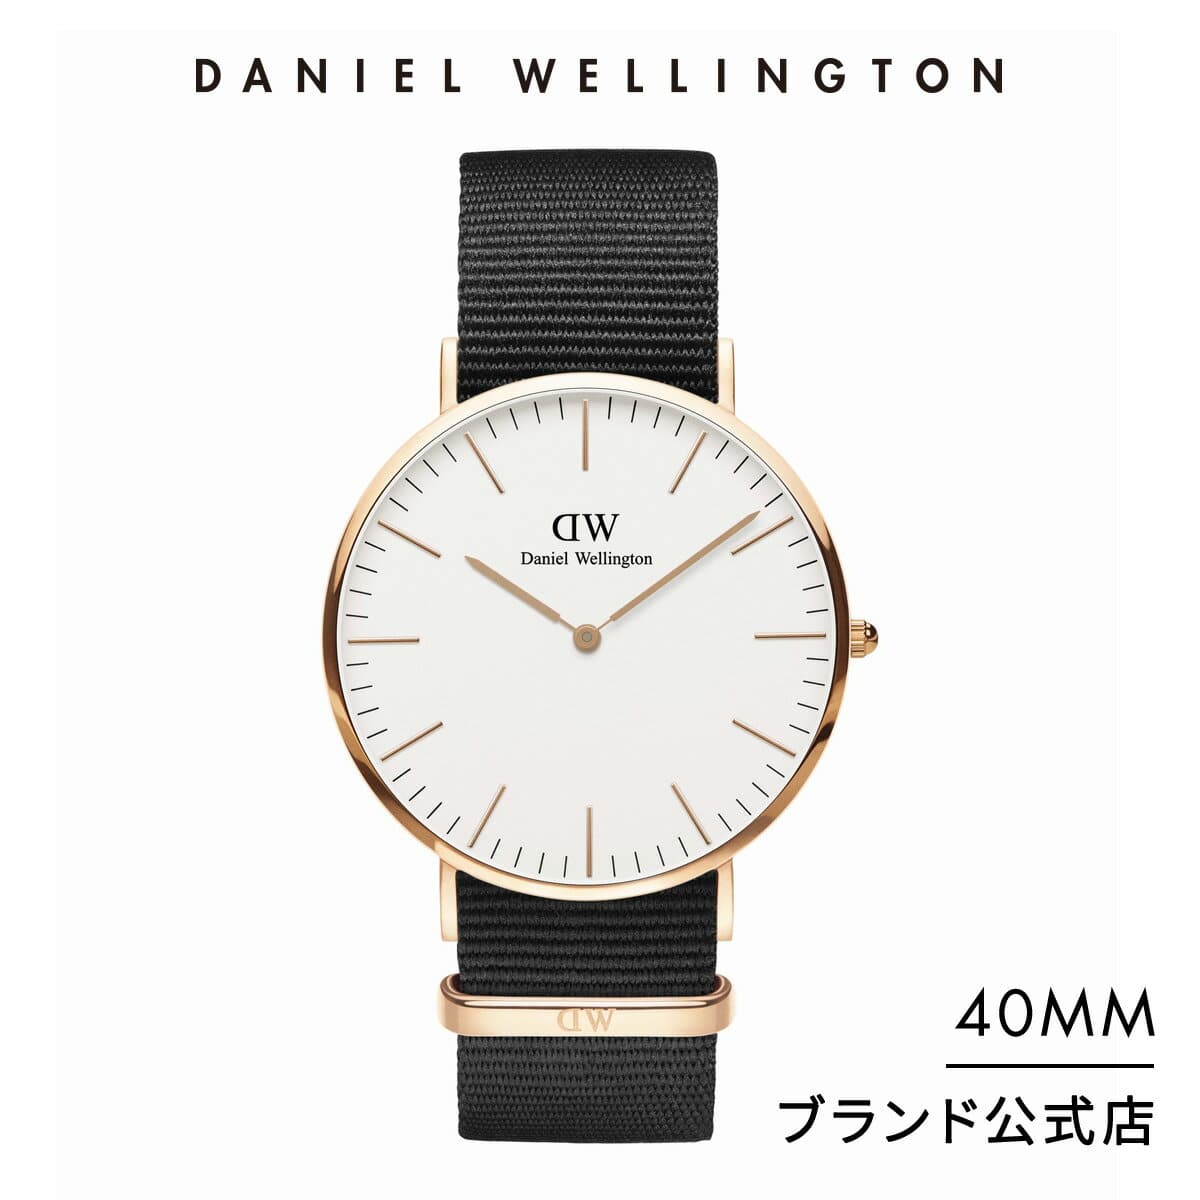 New]Watch [men's] most suitable for Daniel Wellington formula men watch  Classic Cornwall 40mm Nato strap Classic Cornwall DW present fashion  instagenic brand she boyfriend pair-style - BE FORWARD Store